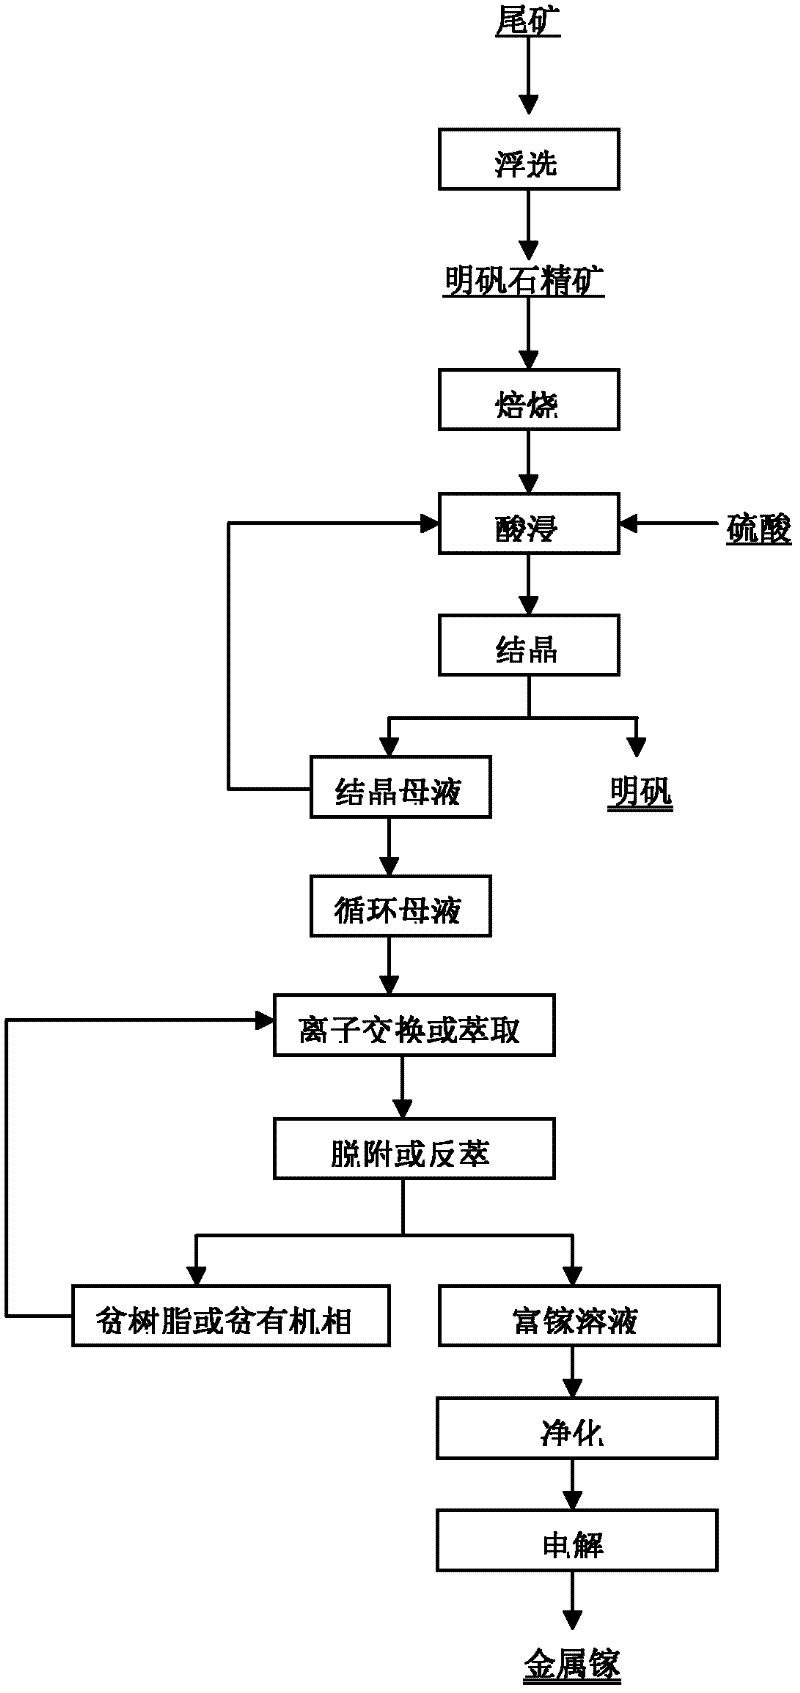 Method for recycling gallium in alunite concentrate